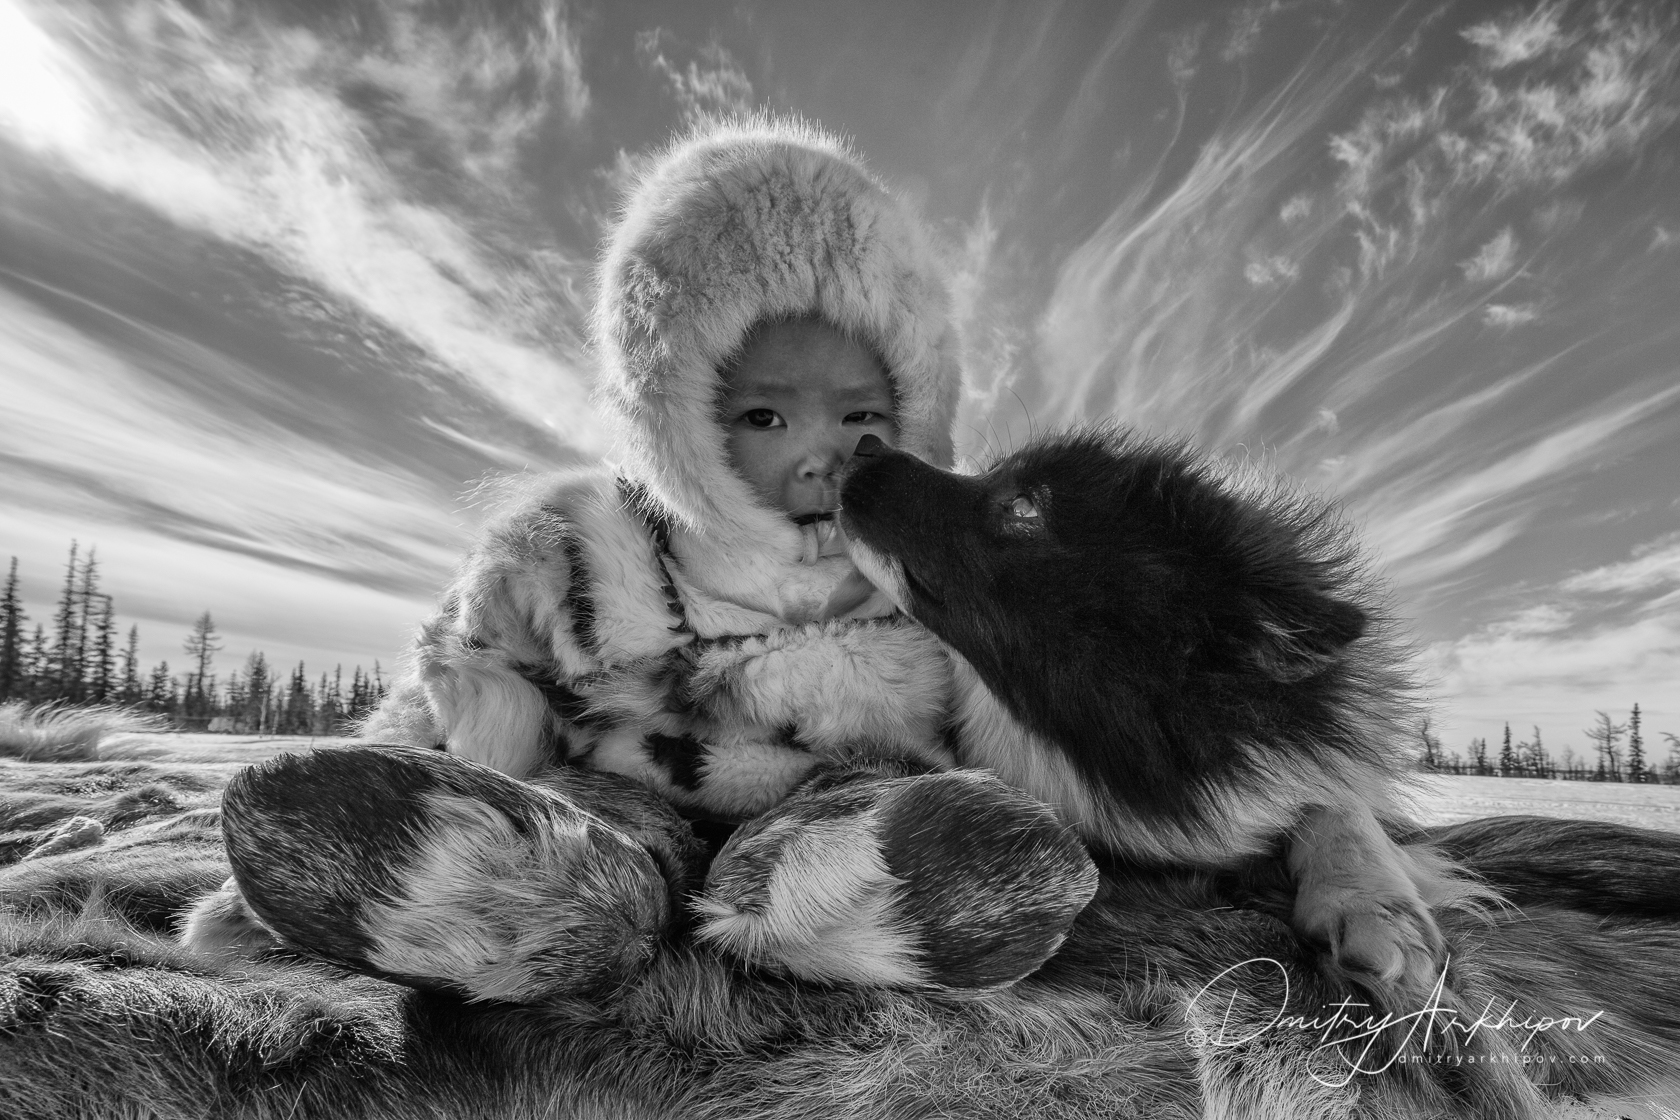 Yamal expedition. The boy with the dog